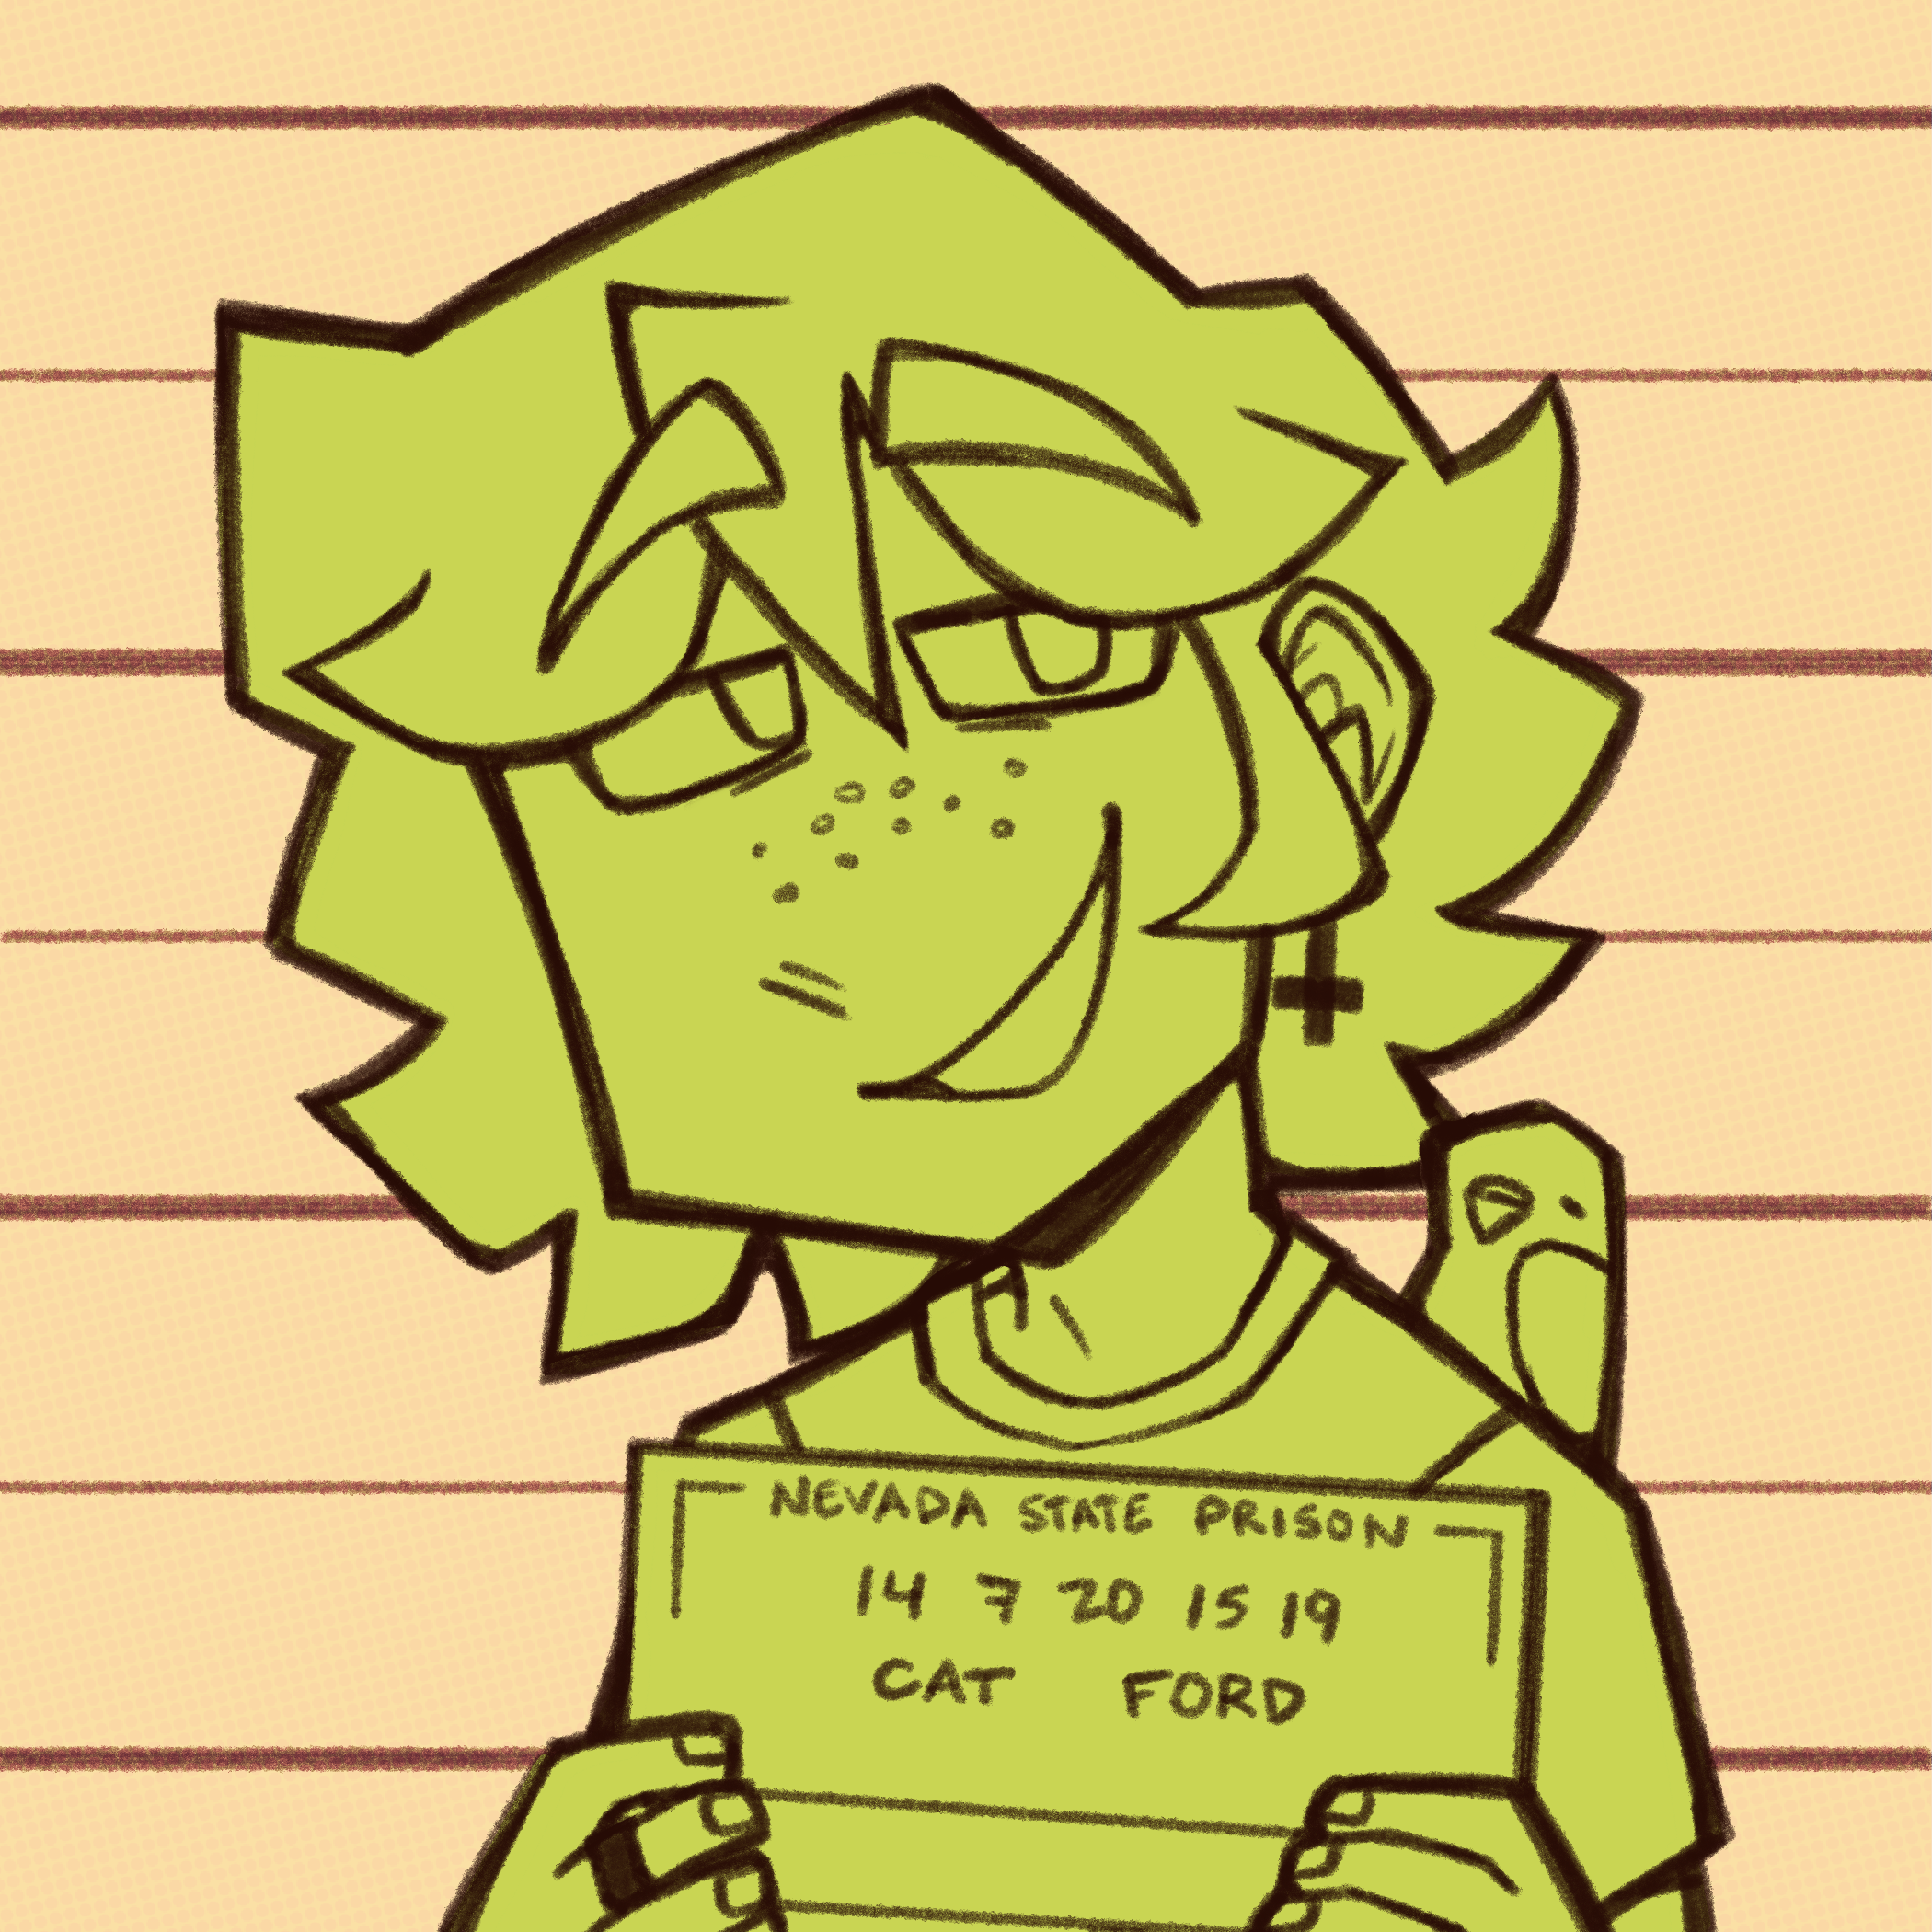 A bust portrait of Cat Ford looking smug while holding a placard that reads 'NEVADA STATE PRISON, 14 7 20 15 19, CAT FORD'